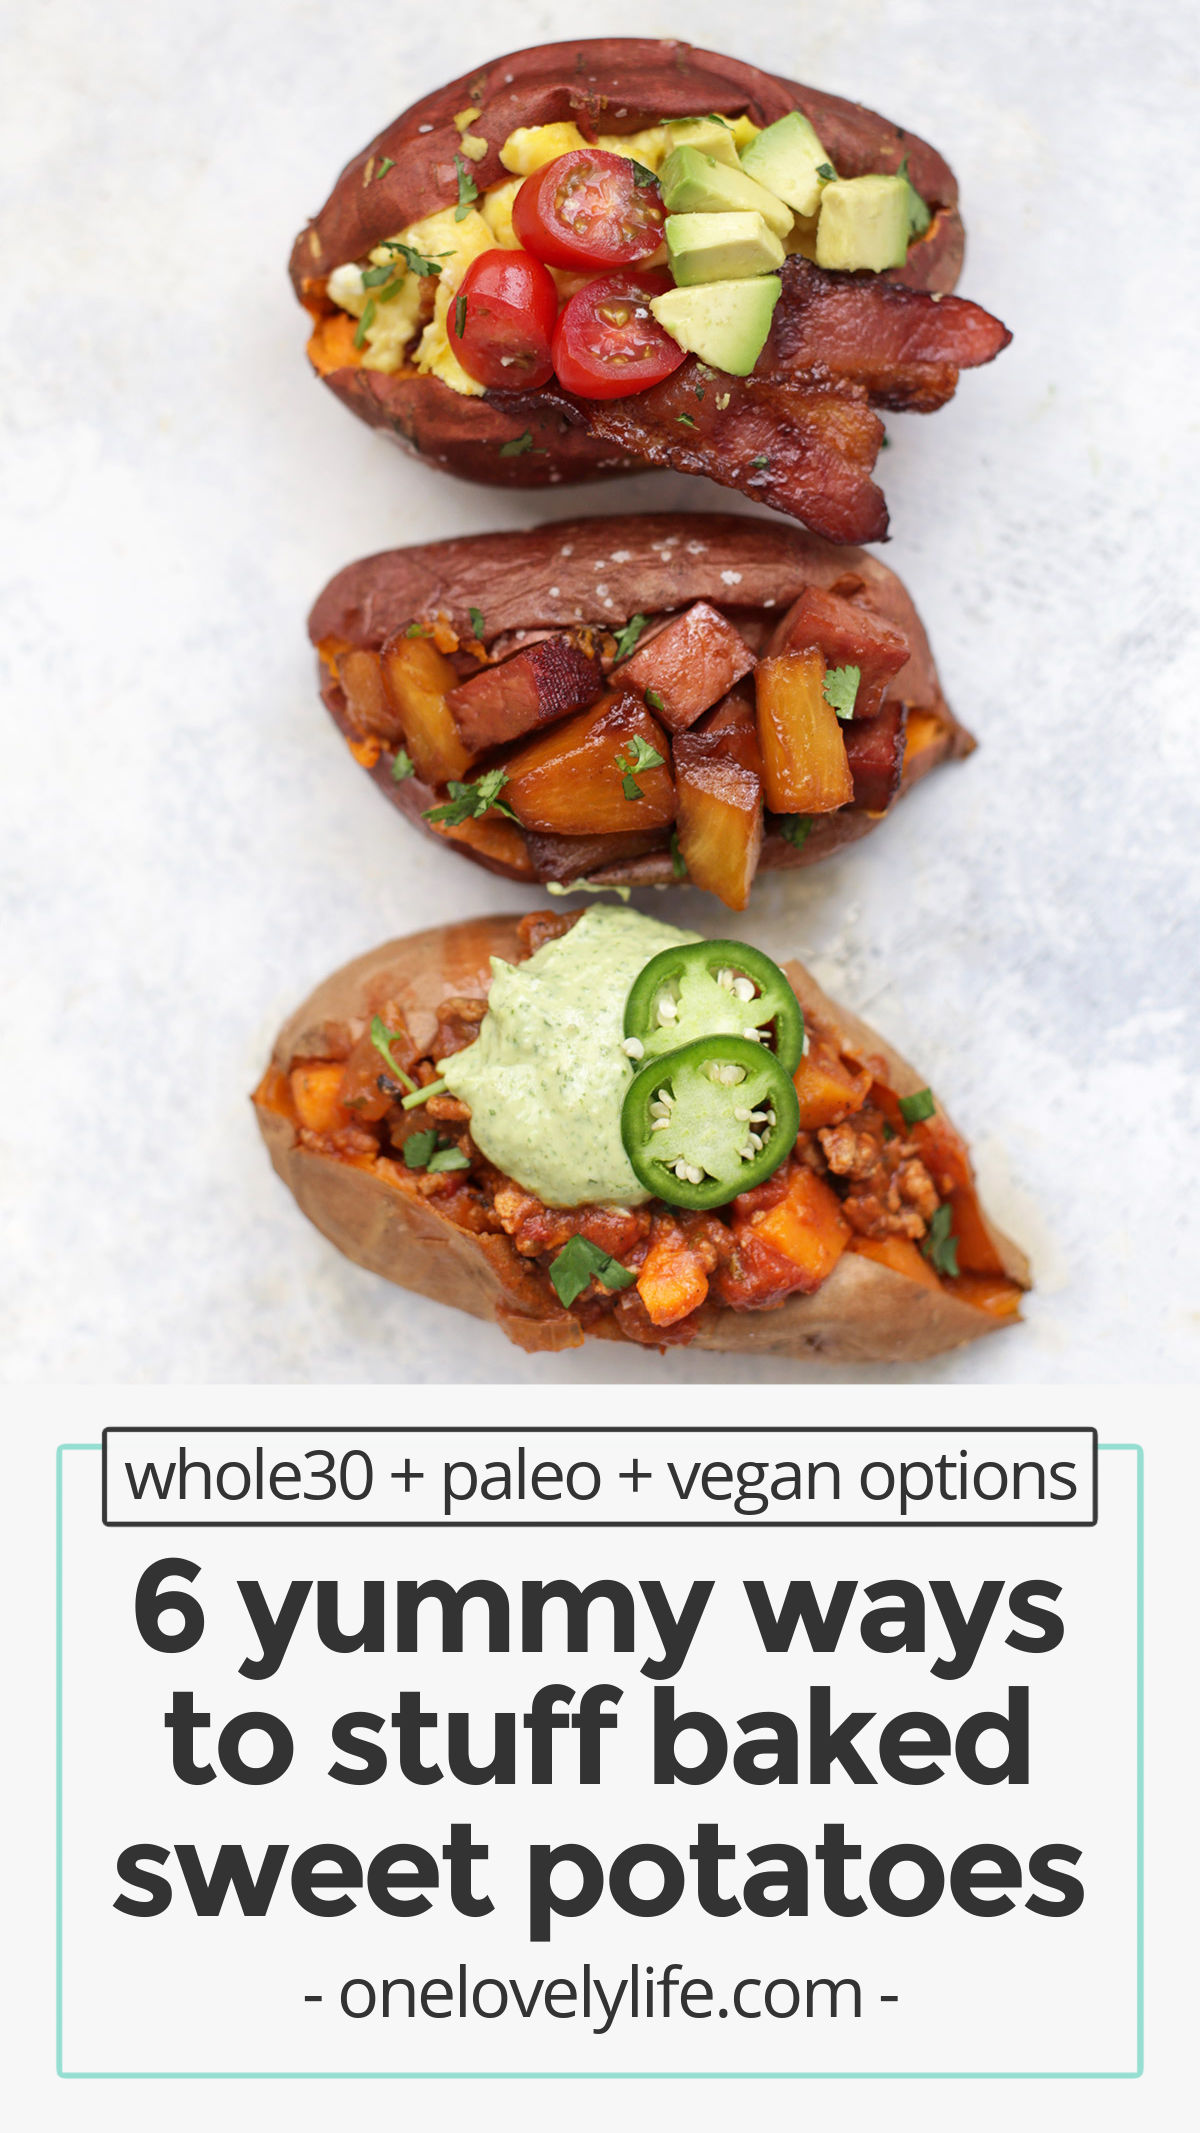 6 Amazing Ways to Stuff a Baked Sweet Potato - My fail-proof method for baking a perfect sweet potato and SO MANY ideas for how to stuff them! / stuffed sweet potatoes / stuffed baked sweet potatoes / paleo stuffed sweet potatoes / vegan stuffed sweet potatoes / baked sweet potatoes / healthy dinner / paleo dinner / whole30 dinner / stuffed baked potatoes / mexican stuffed sweet potatoes / hawaiian stuffed sweet potatoes / bbq stuffed sweet potatoes / buffalo stuffed sweet potatoes